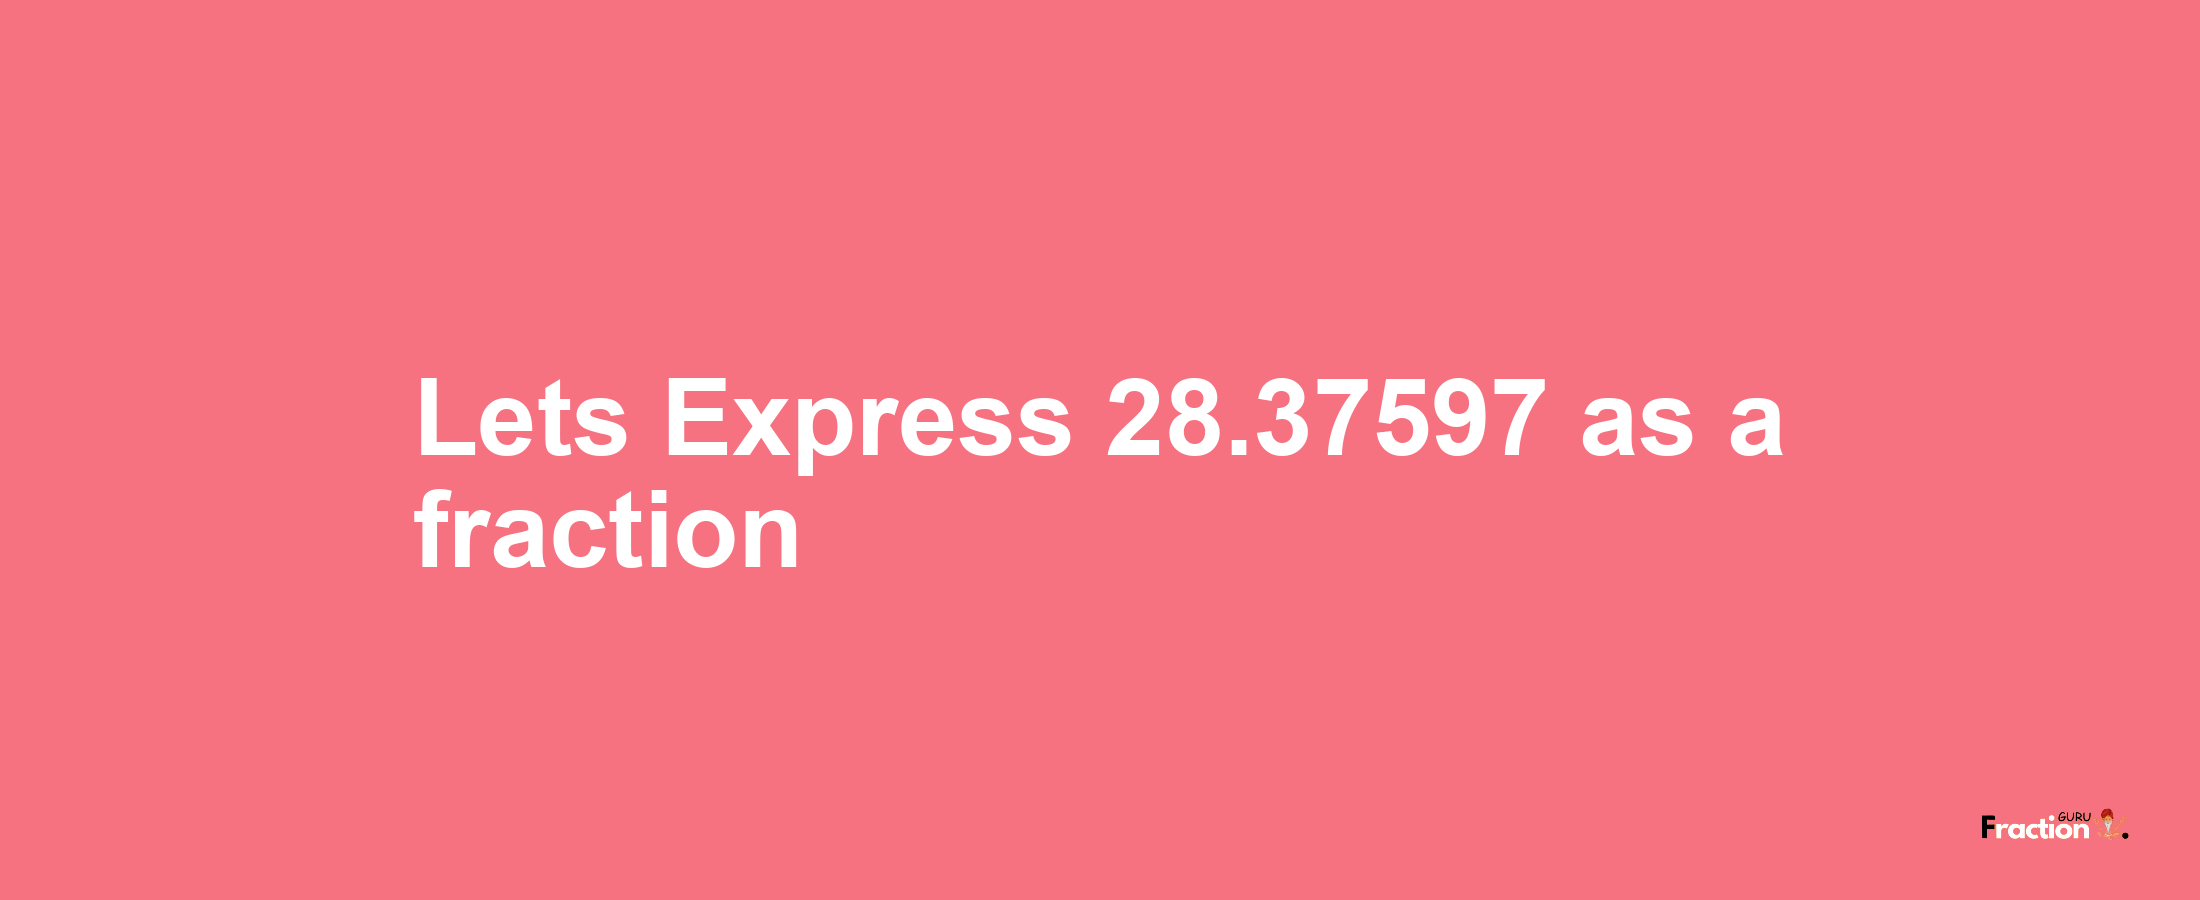 Lets Express 28.37597 as afraction